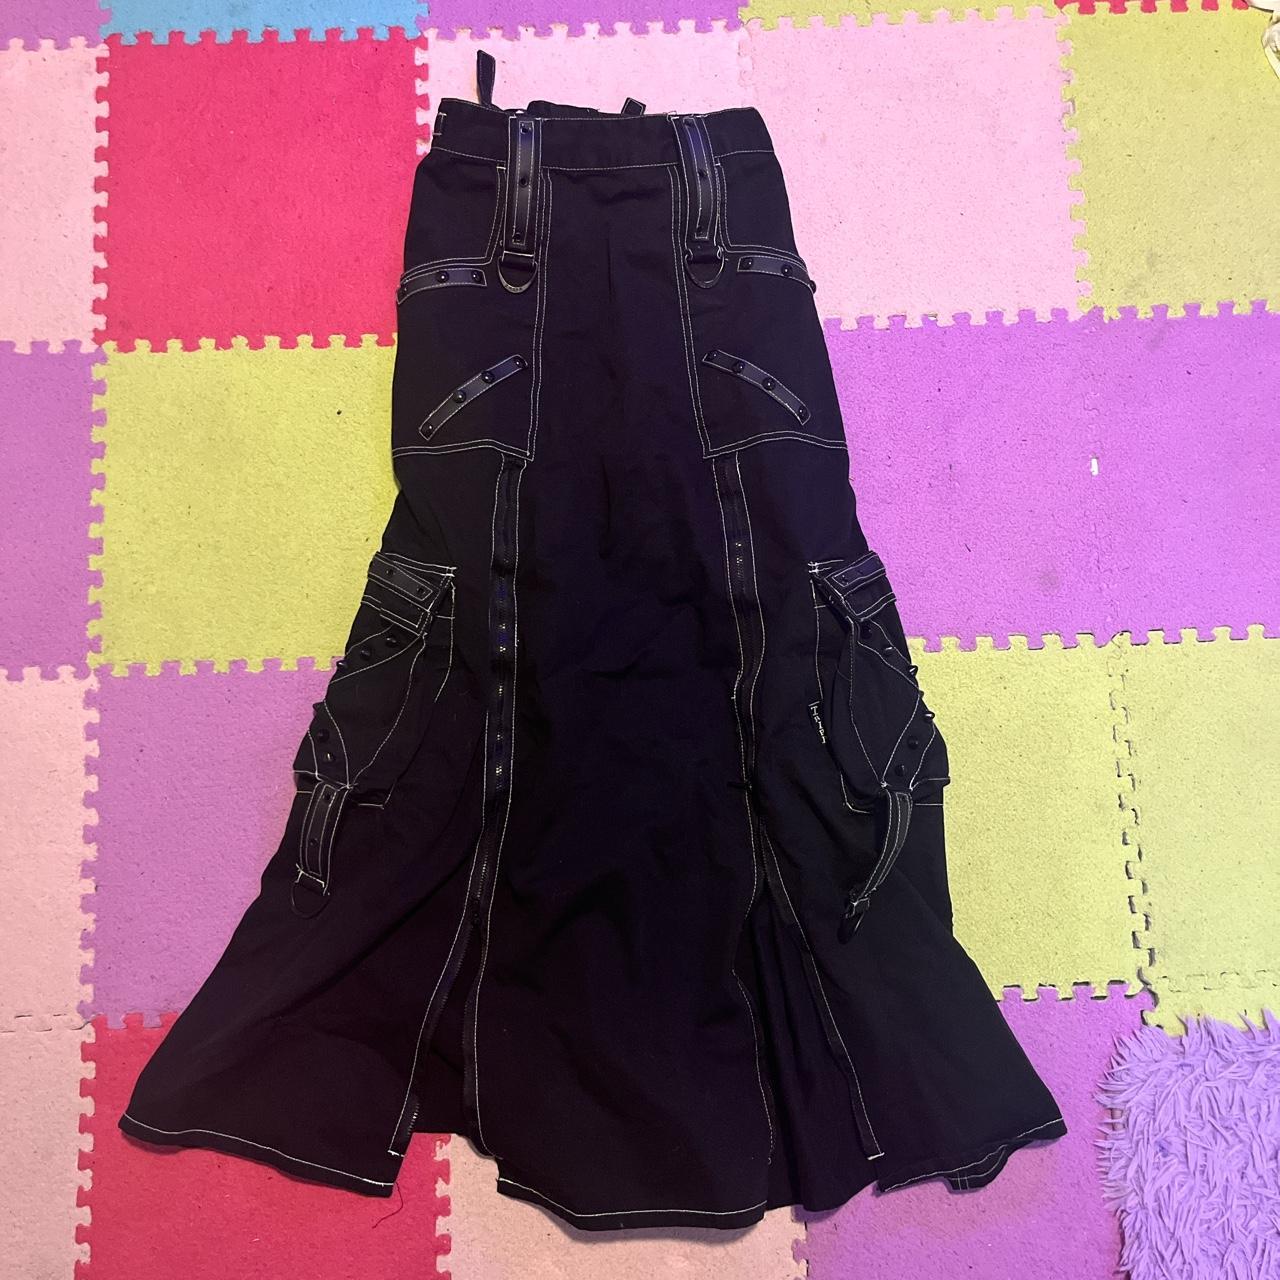 VINTAGE TRIPP NYC Long Black Skirt Pockets + Chains SIZE LARGE Hot